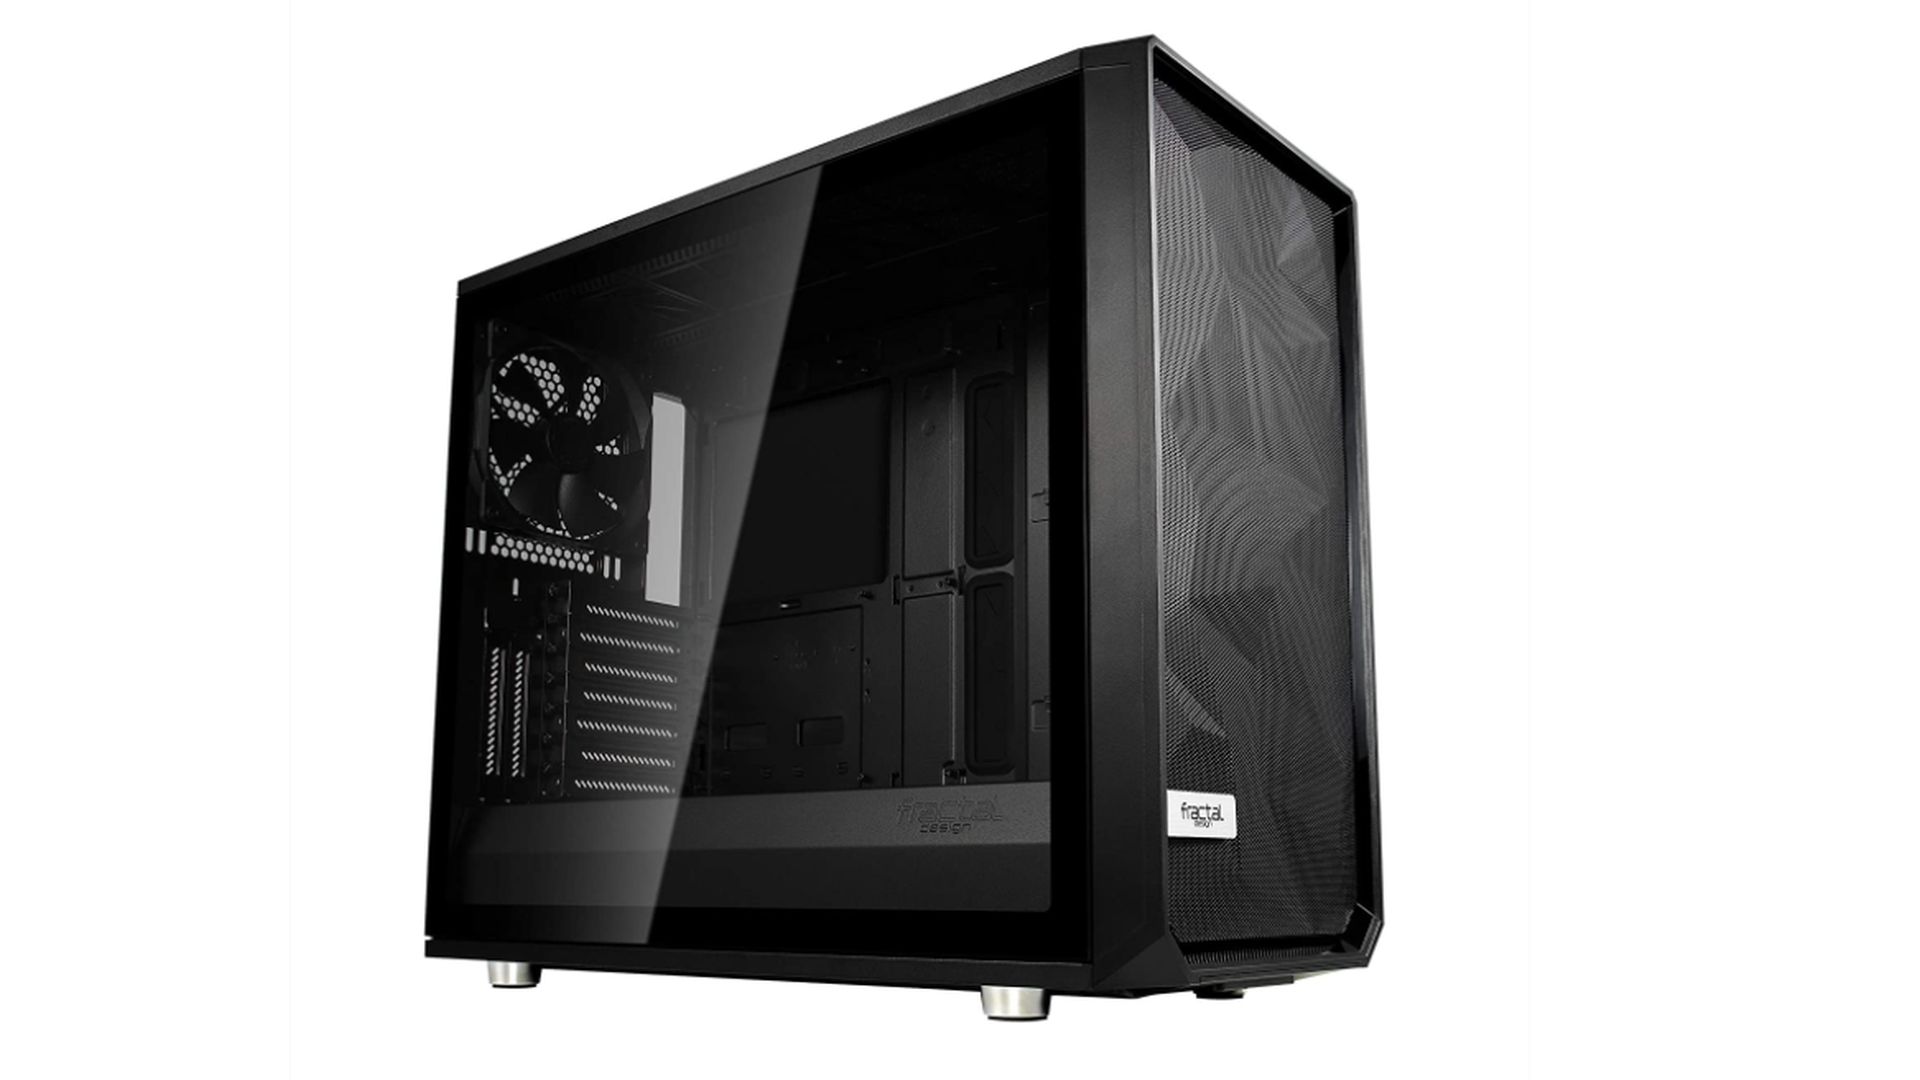 https://www.pcgamesn.com/wp-content/uploads/2020/11/cyber-monday-pc-gaming-cases-black-friday-2.jpg